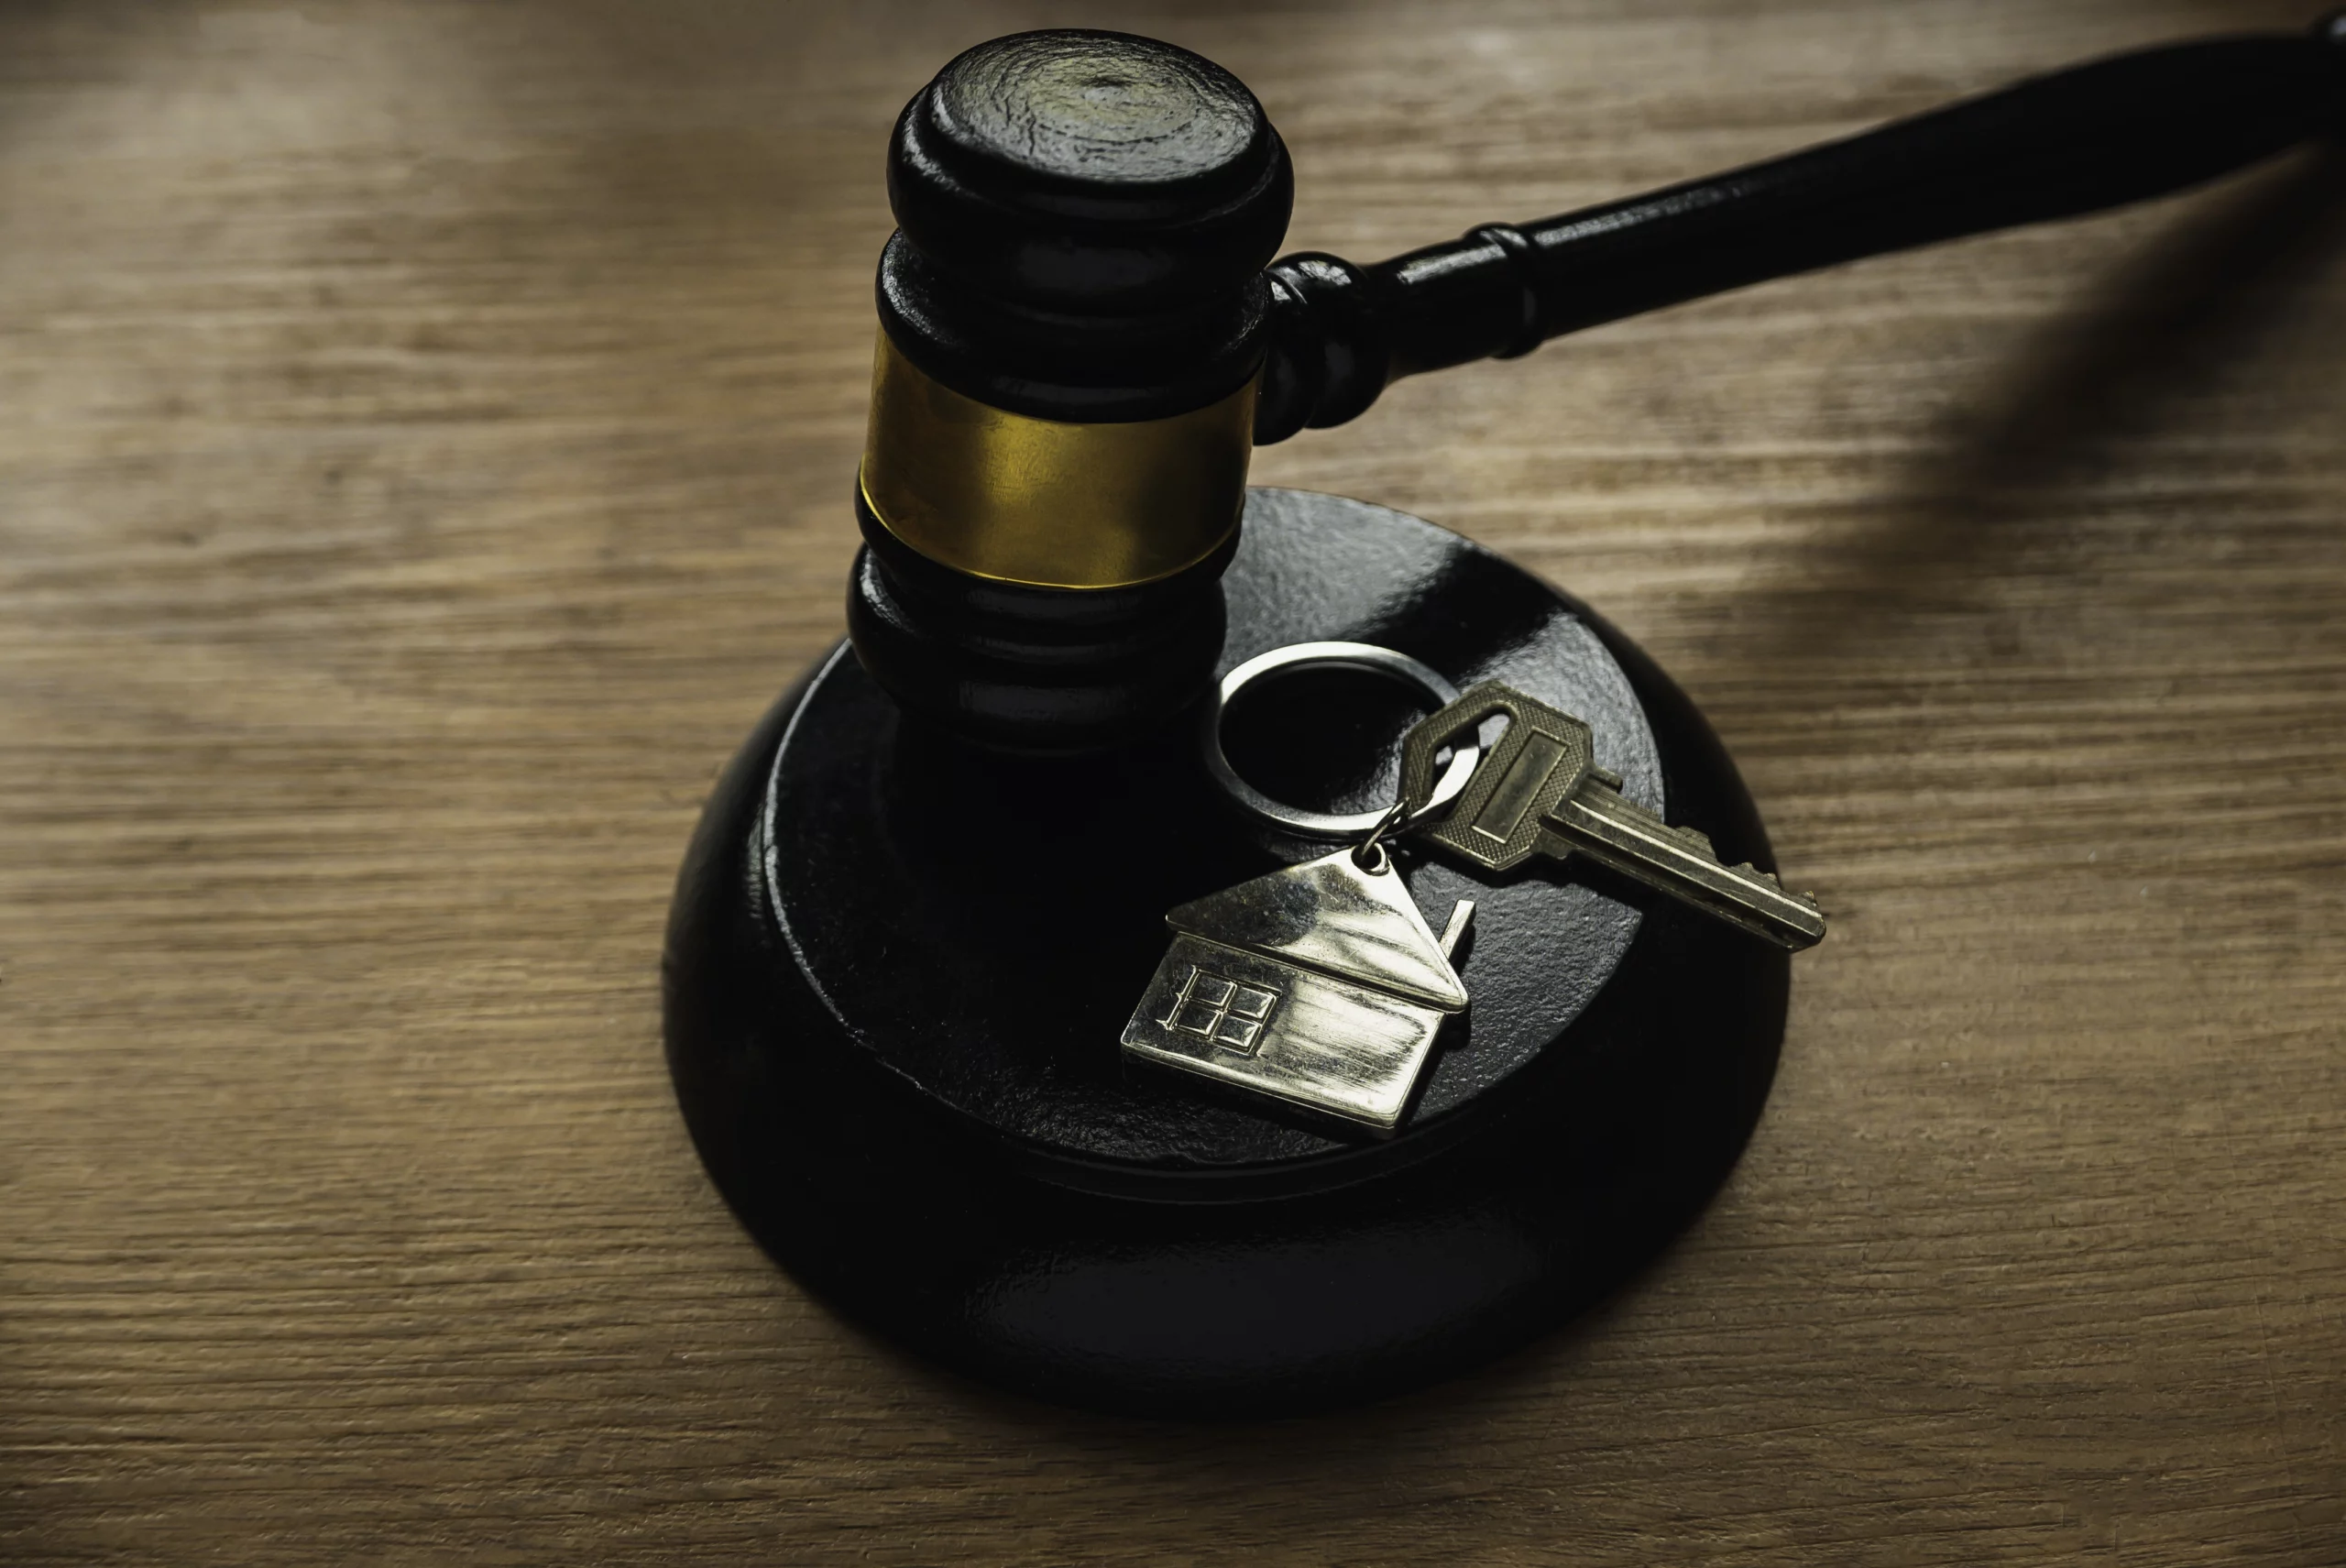 what is nonexempt property in bankruptcy